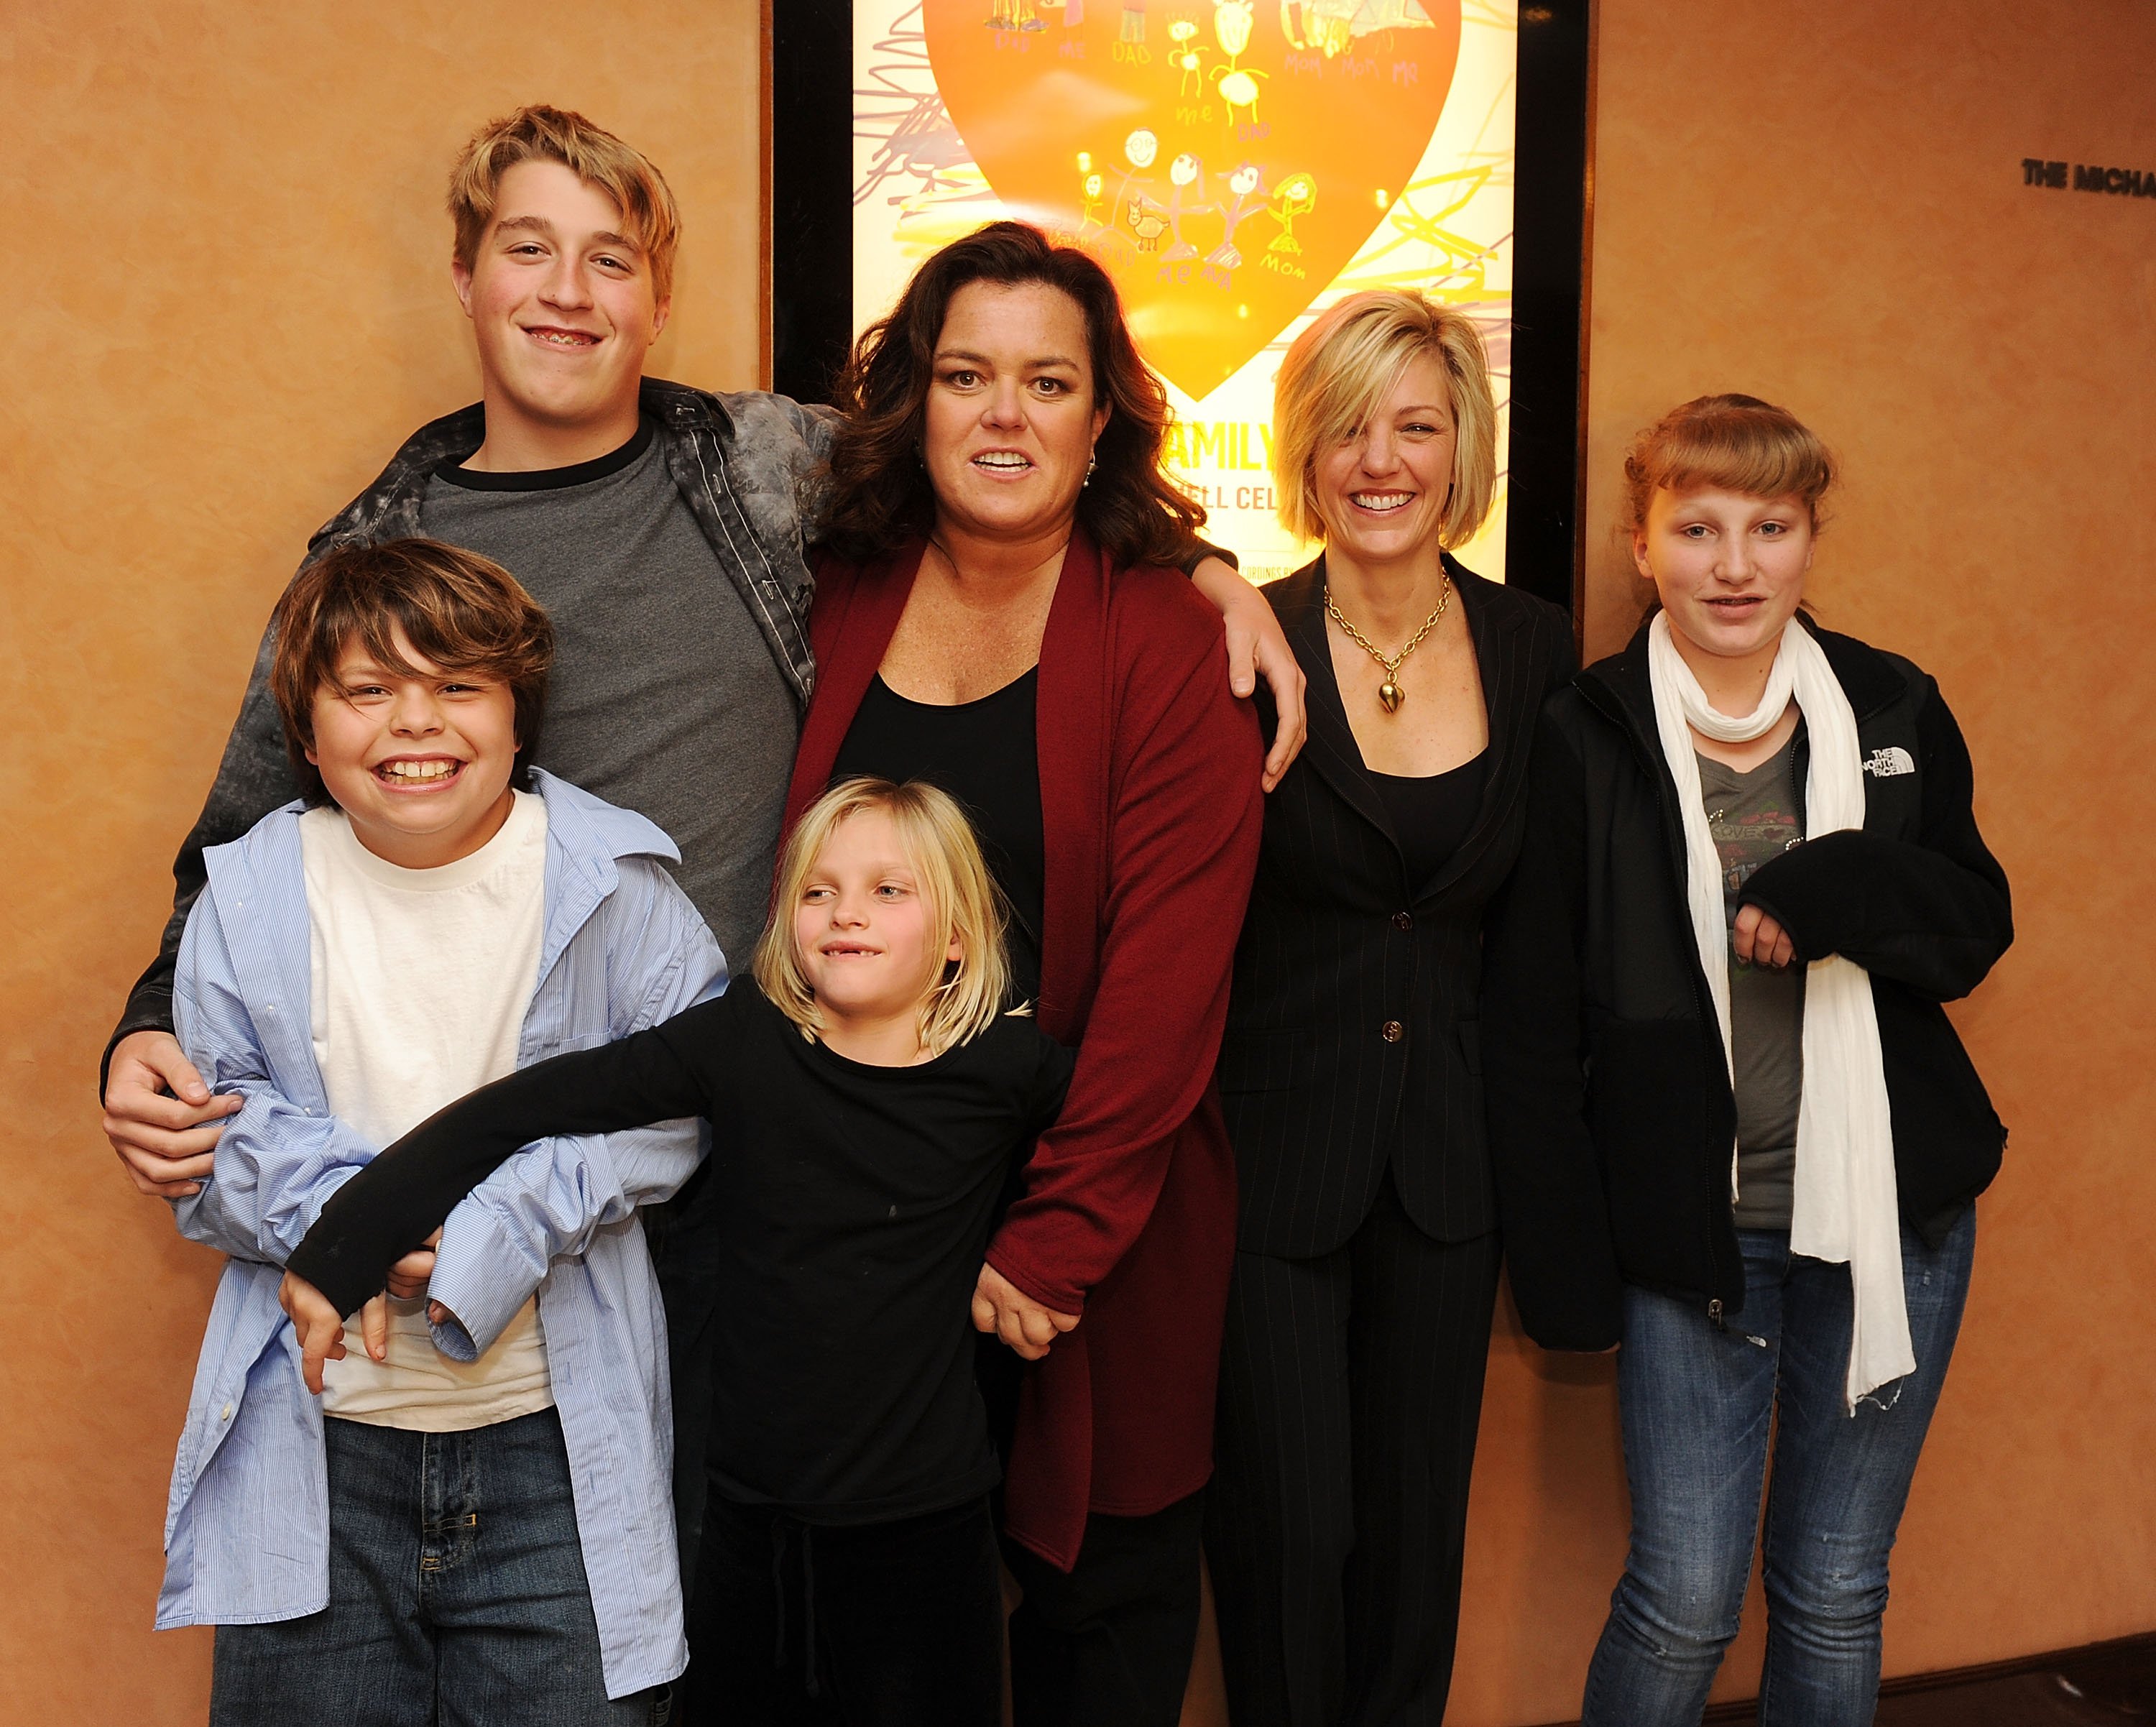 Rosie O'Donnell and her kids attend the screening of "A Family is a Family" in New York City on January 19, 2010 | Photo: Getty Images